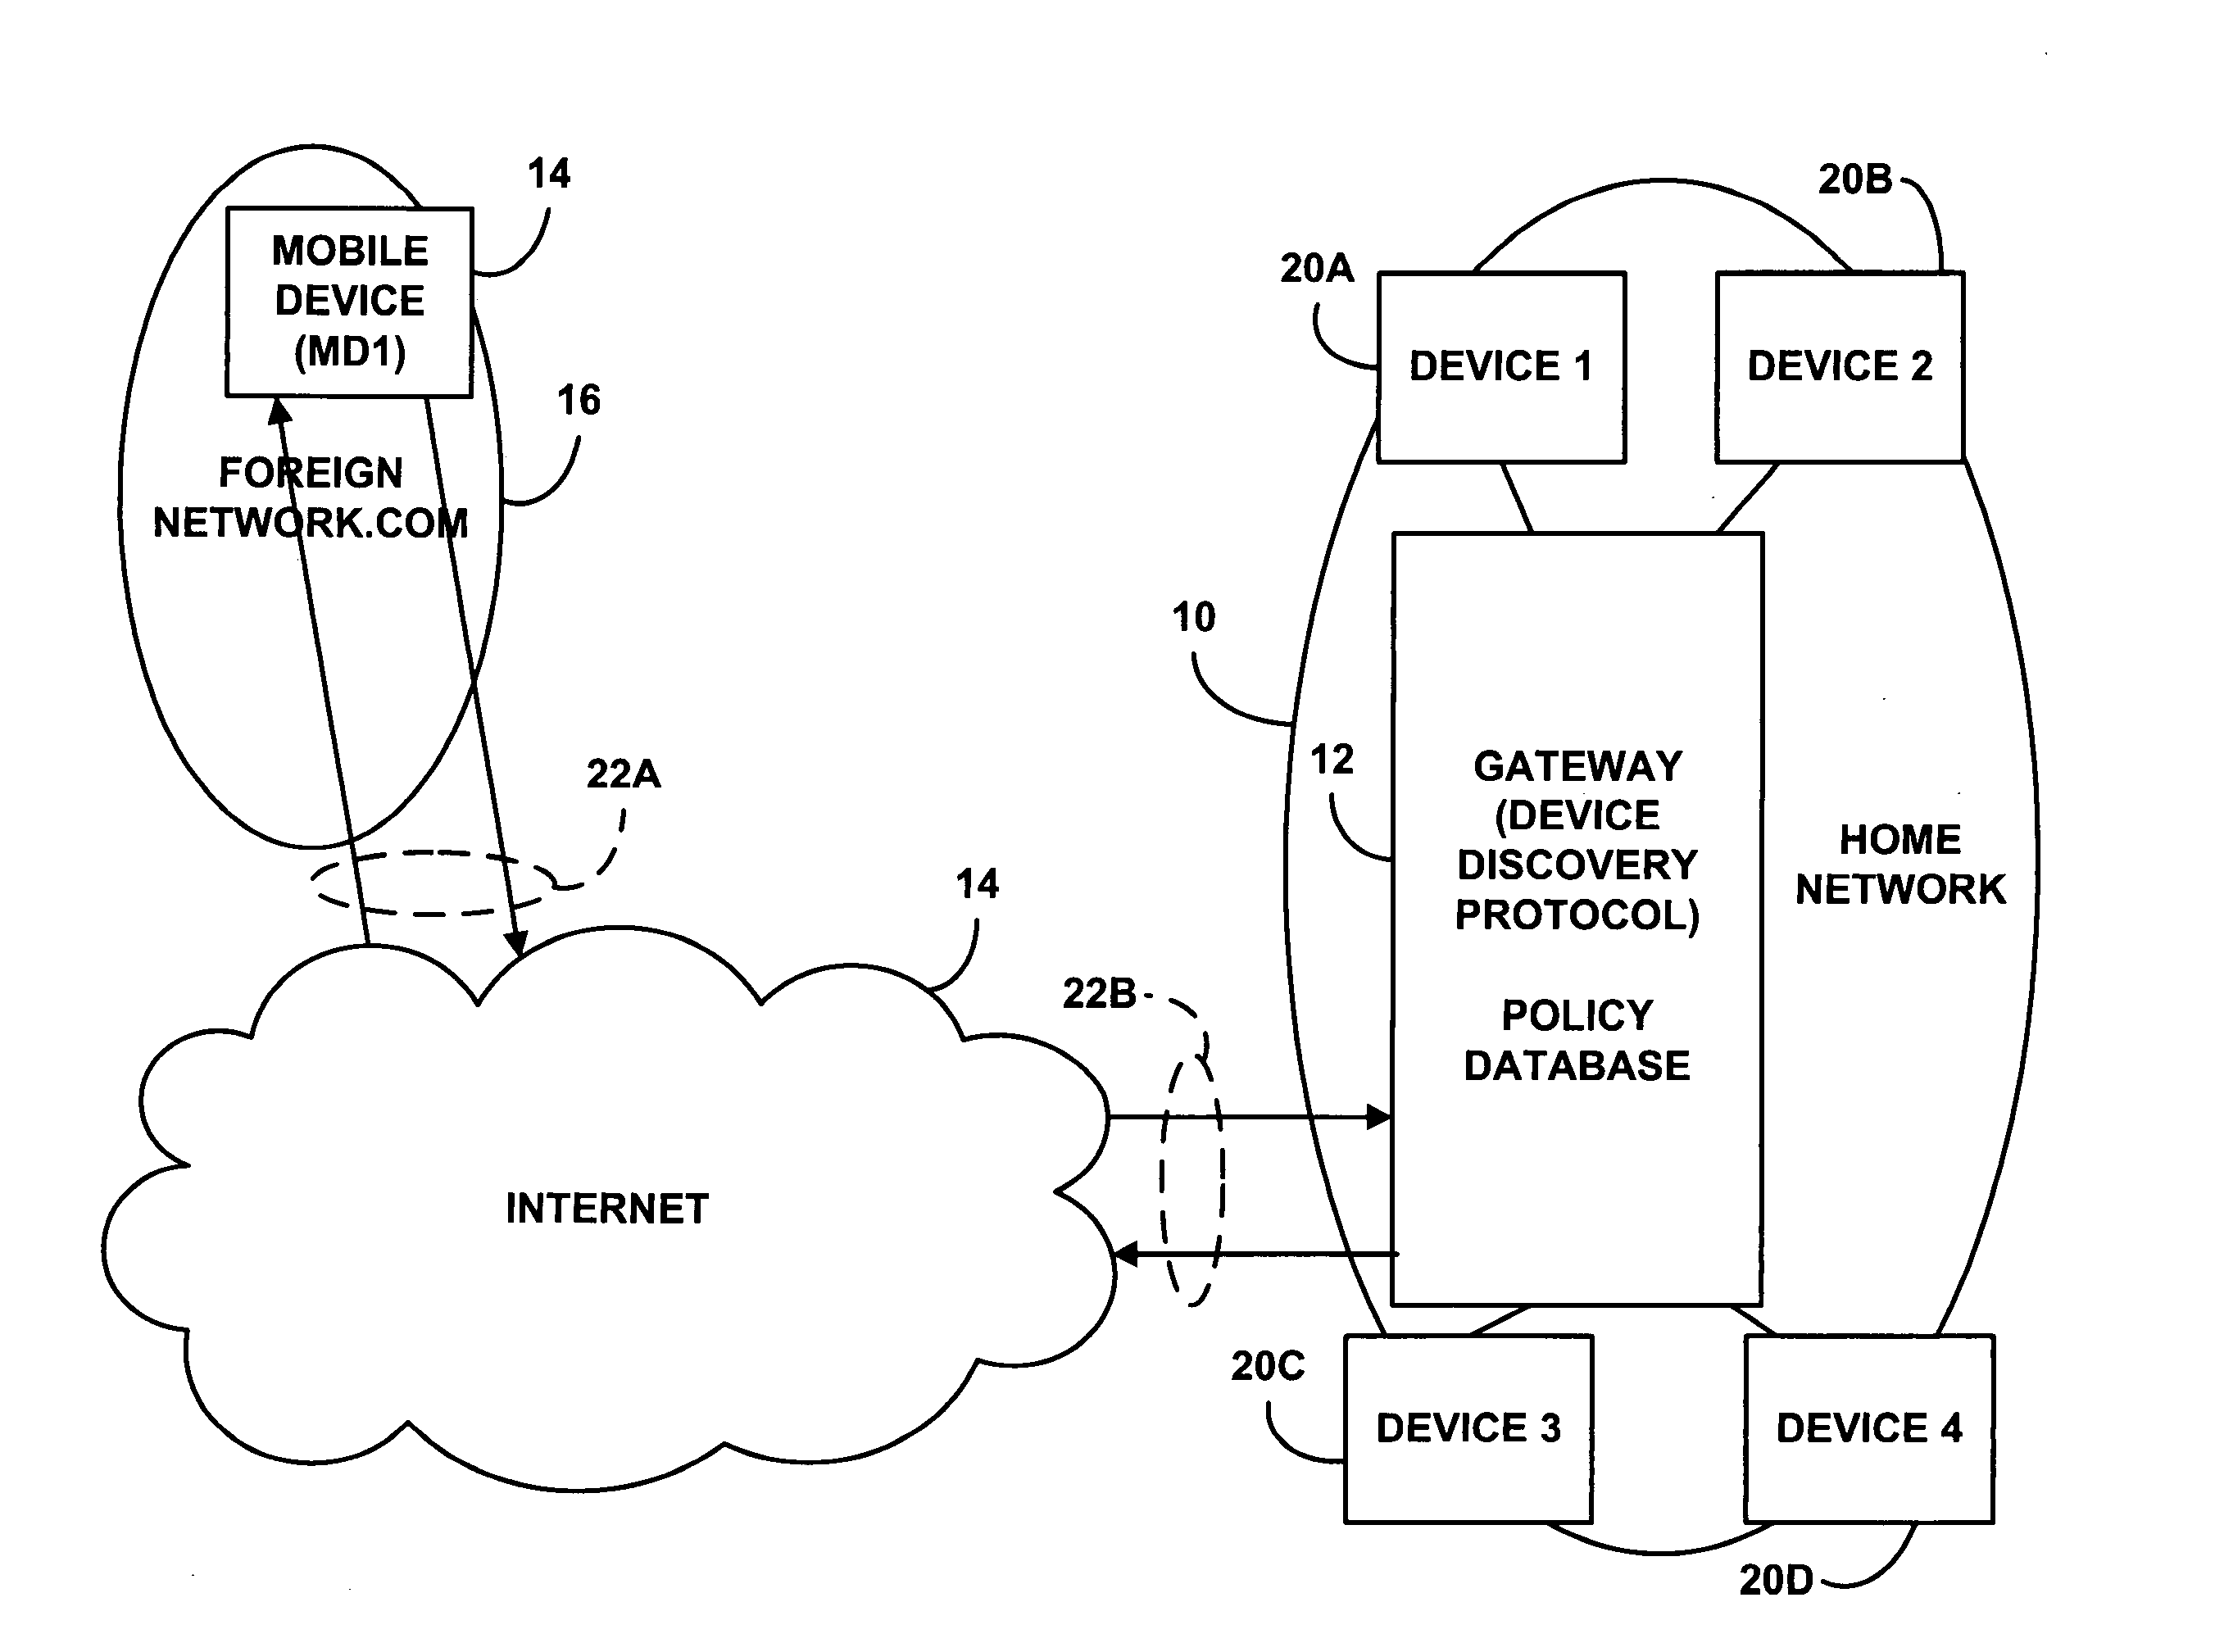 Policy-based device/service discovery and dissemination of device profile and capability information for P2P networking